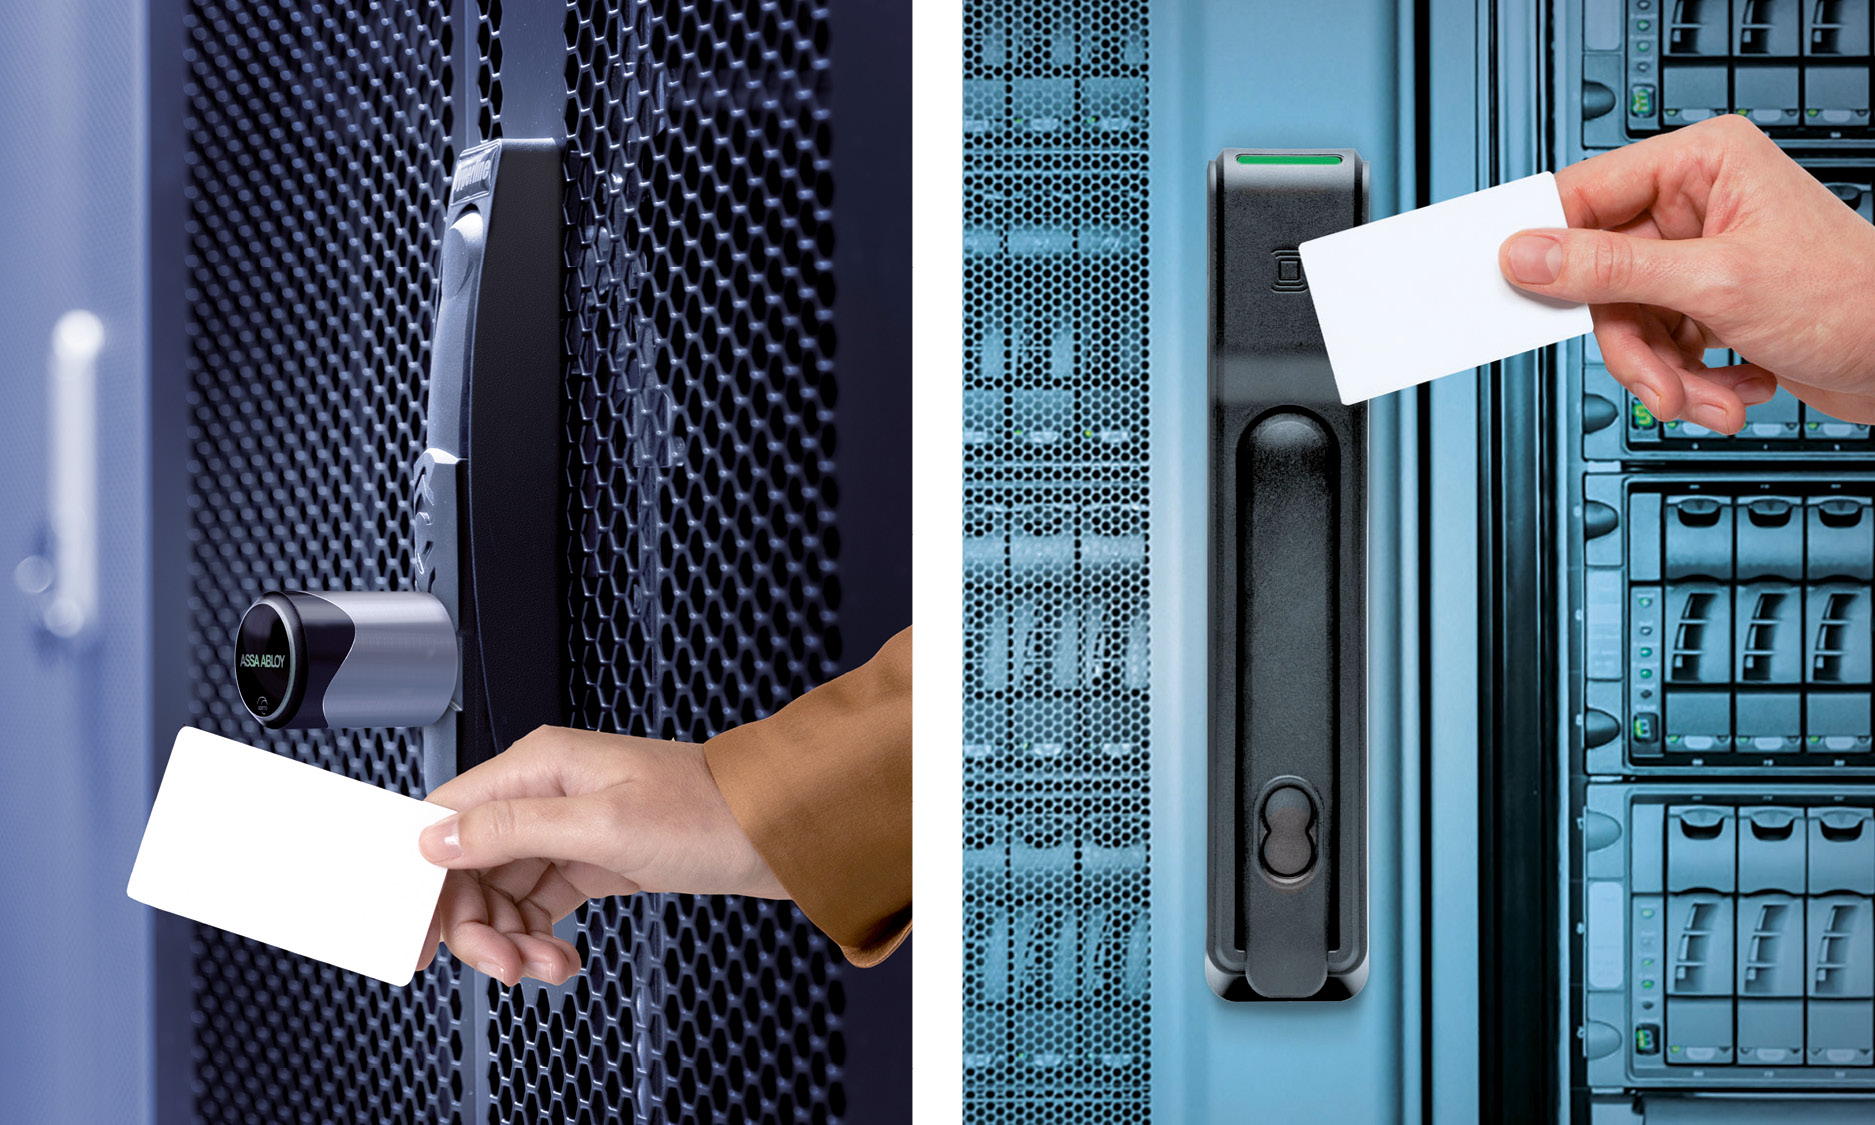 Protecting data centres and servers with better physical security